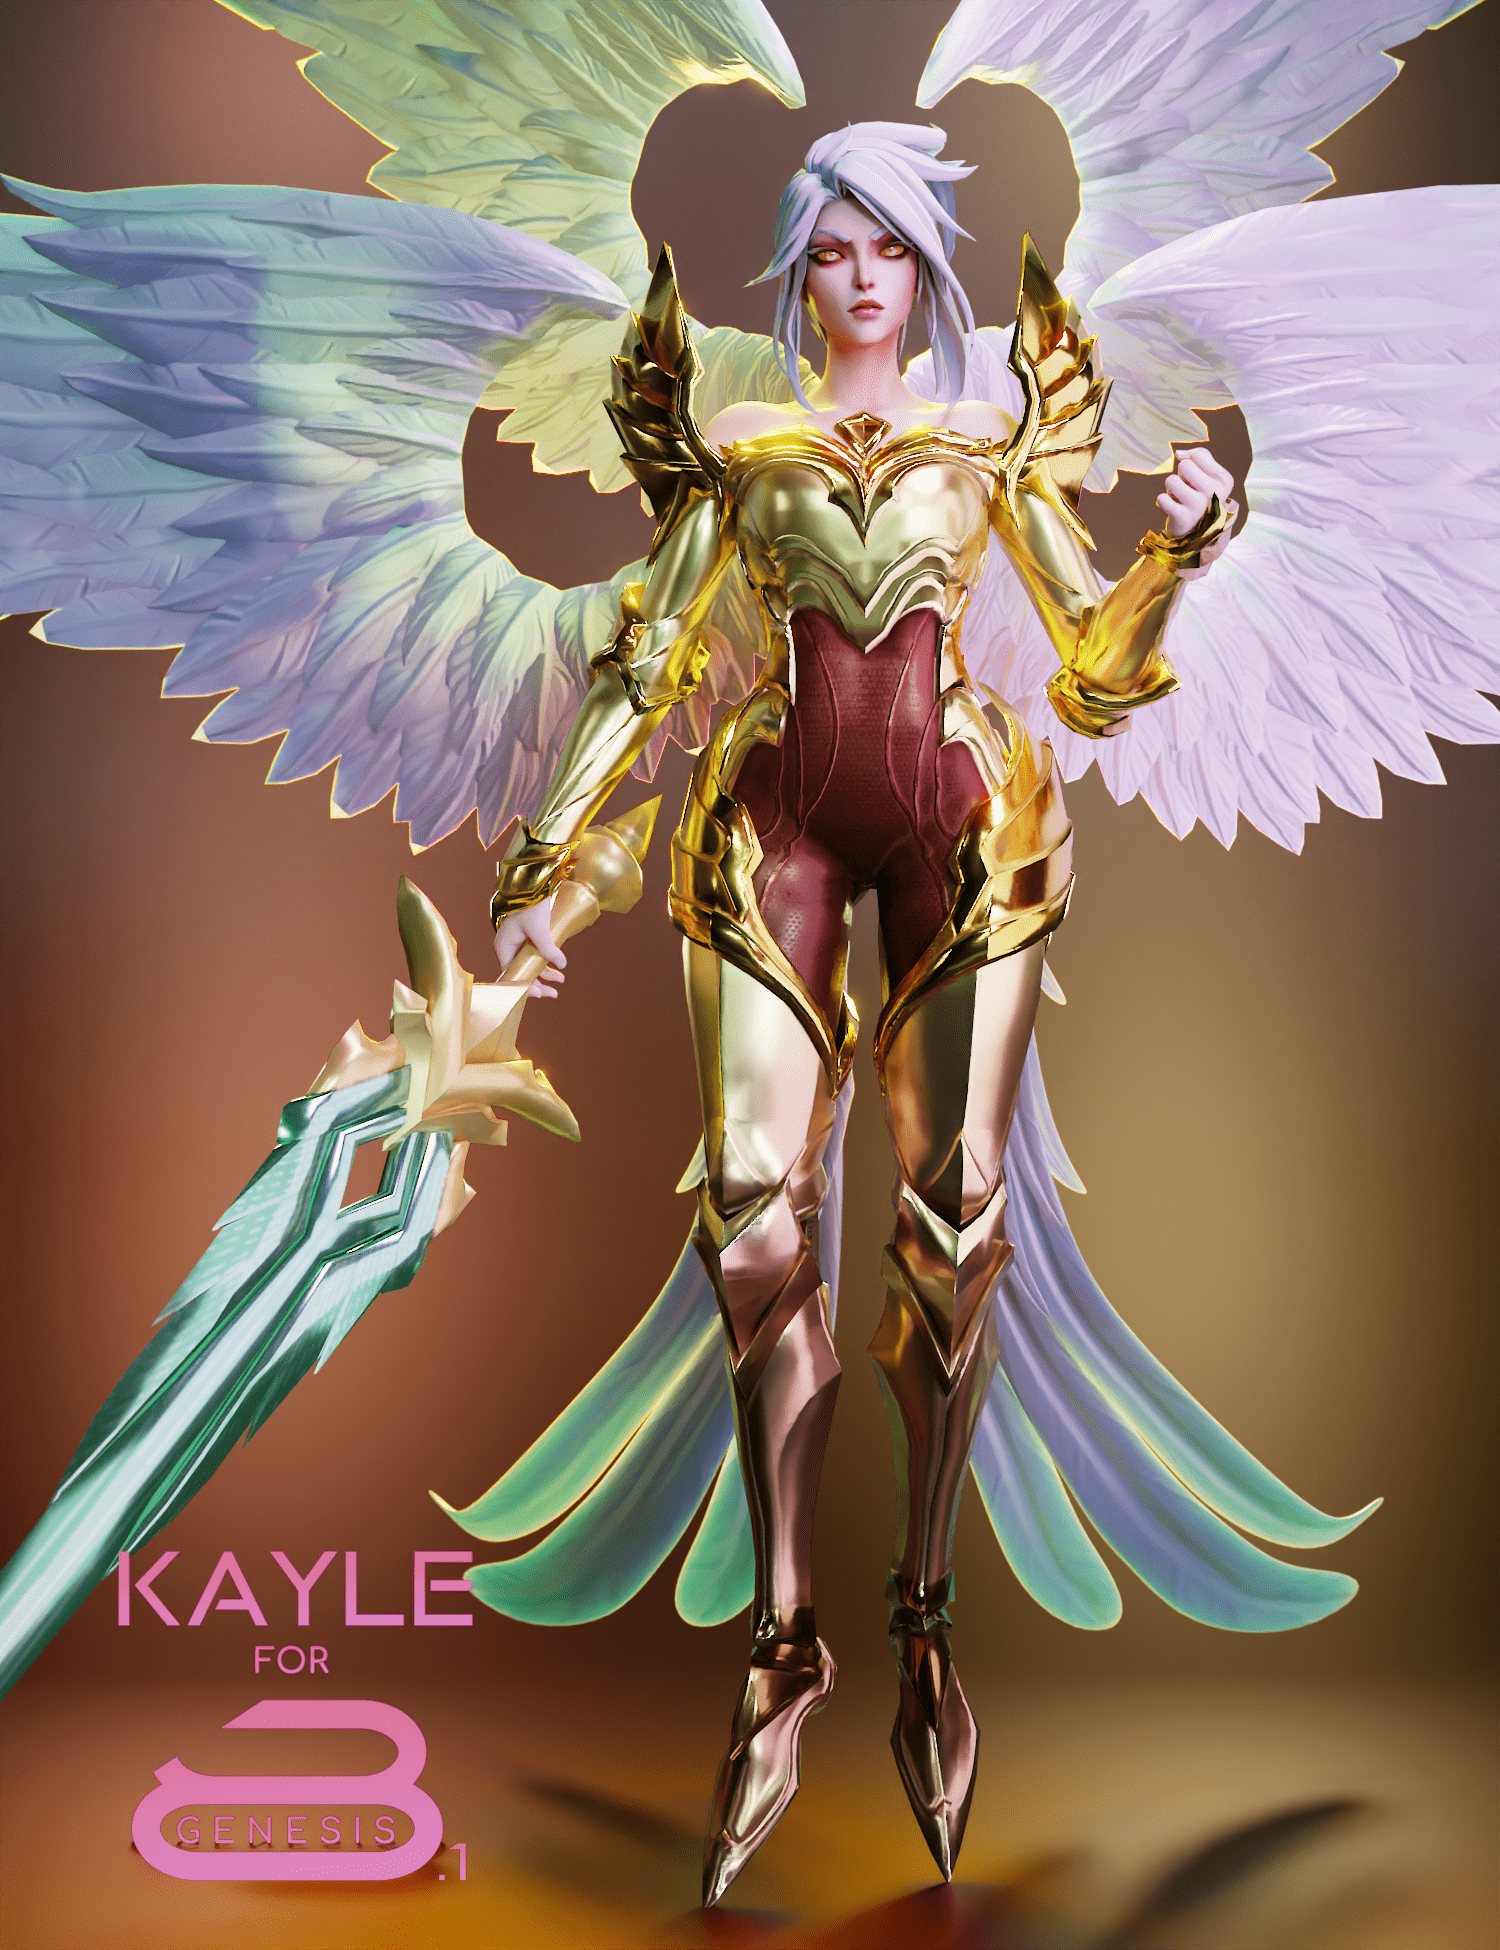 Kayle For Genesis 8 And 8.1 Female_DAZ3D下载站